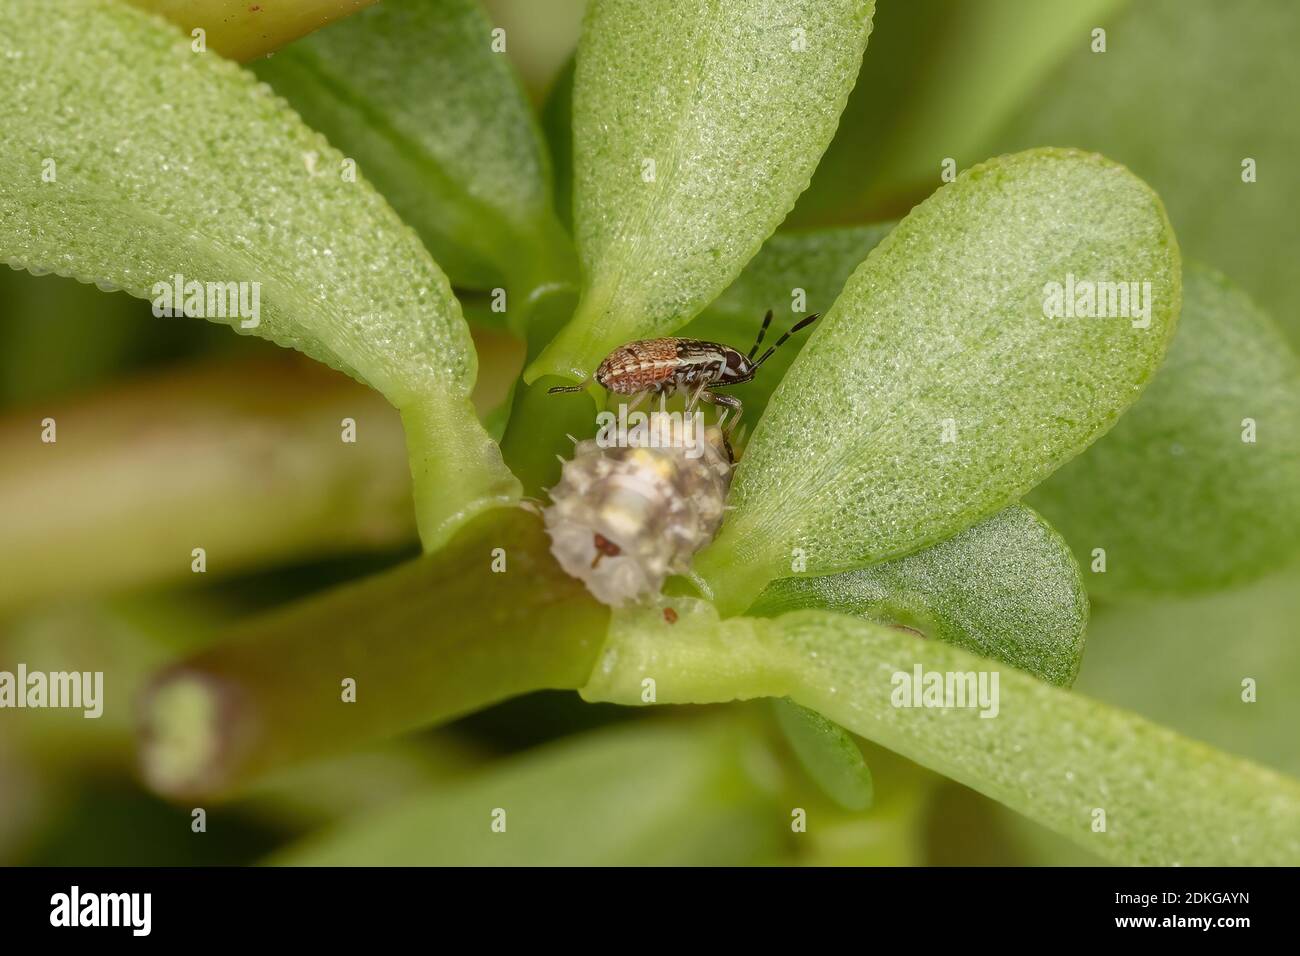 Seed bug nymph of the Subfamily Orsillinae on a Common Purslane plant of the species Portulaca oleracea Stock Photo